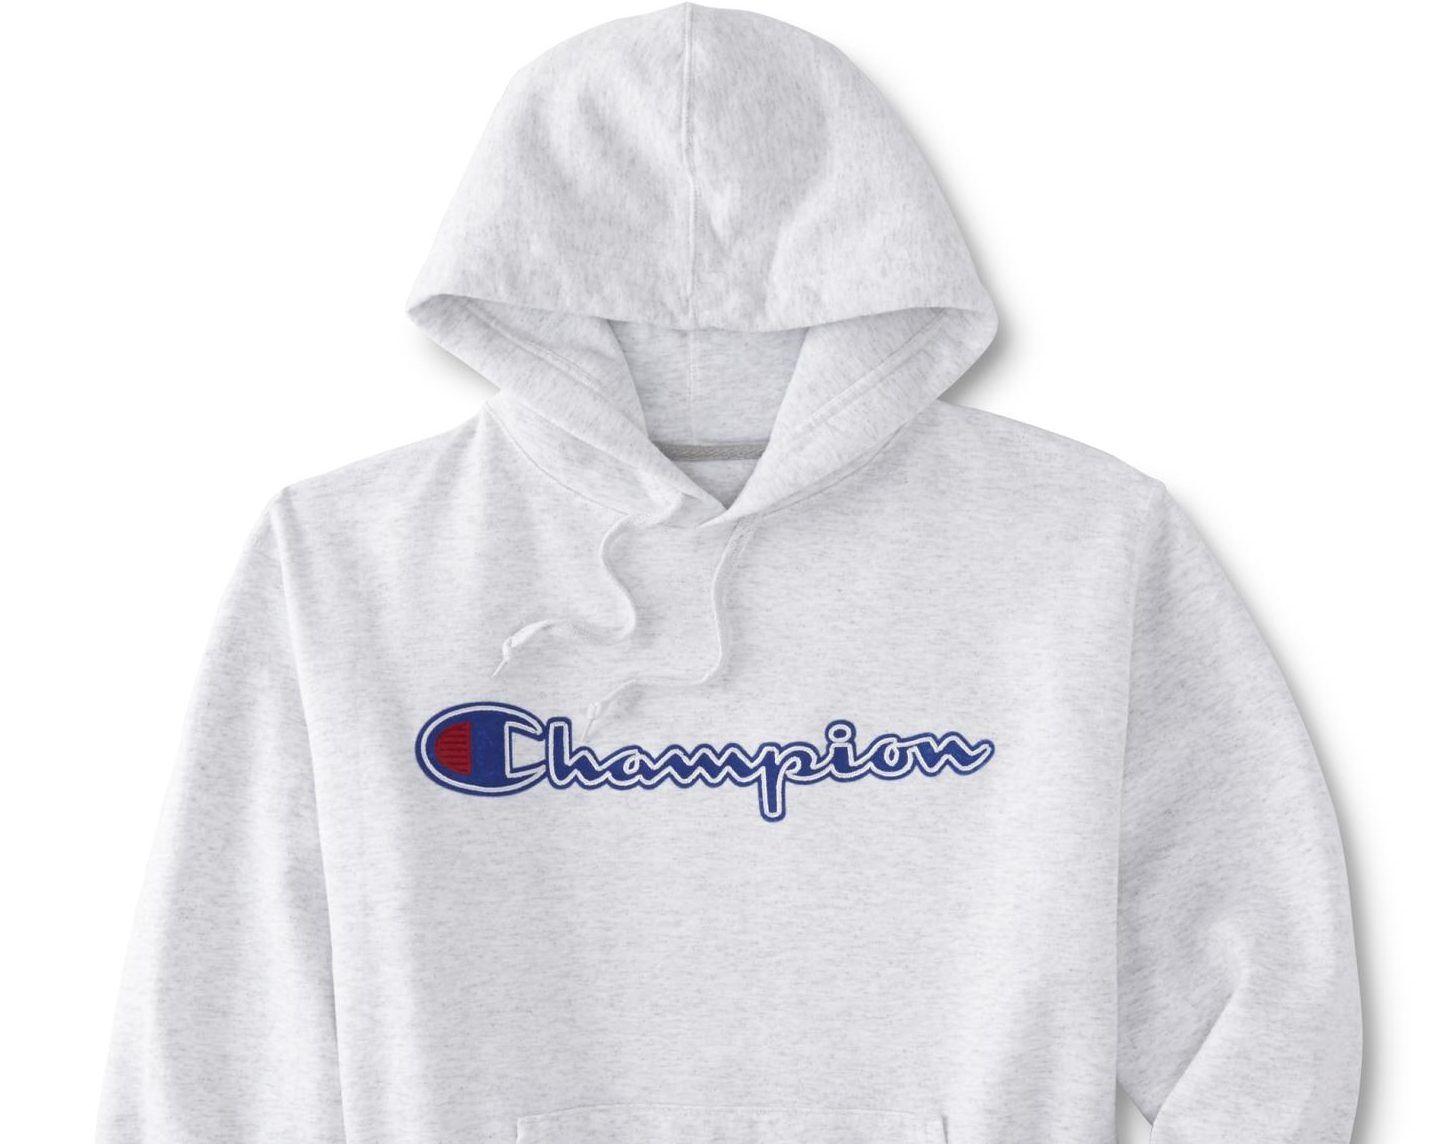 Champion Clothing Line Logo - How Champion Became One of the Coolest Brands in Clothing… Again ...